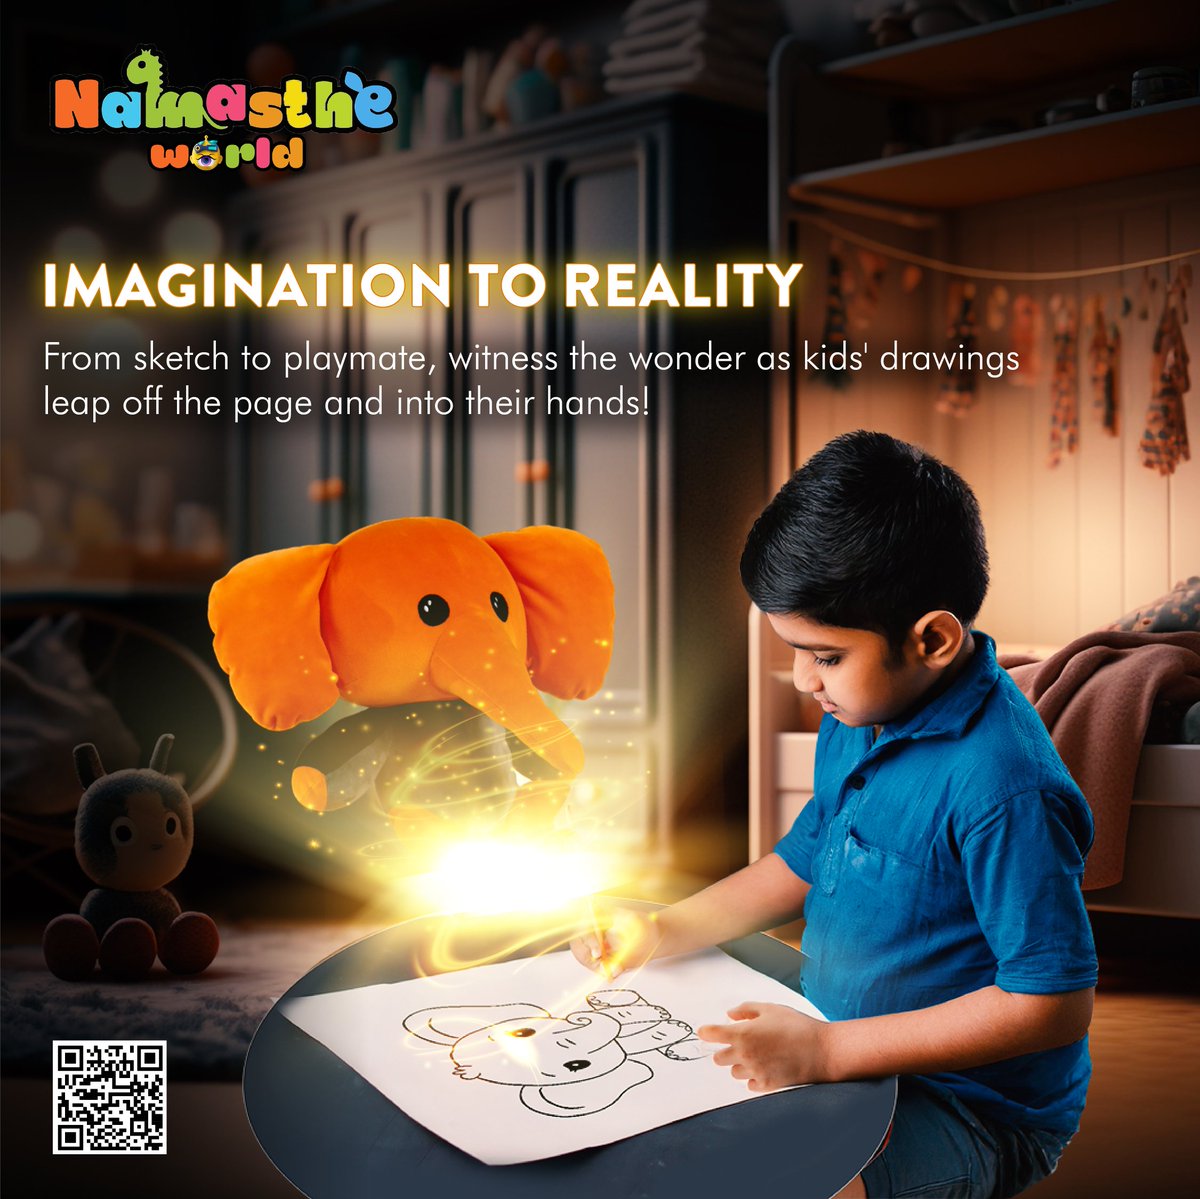 Unlocking imagination! Join the fun as we bring your little artist's drawings to life. Turn your kids imagination to huggable reality, with us. Tune in for the adorable transformations #SoftToys #plushie #namastheworld #woodentoys #sketchtoreality #drawing #kids #toys